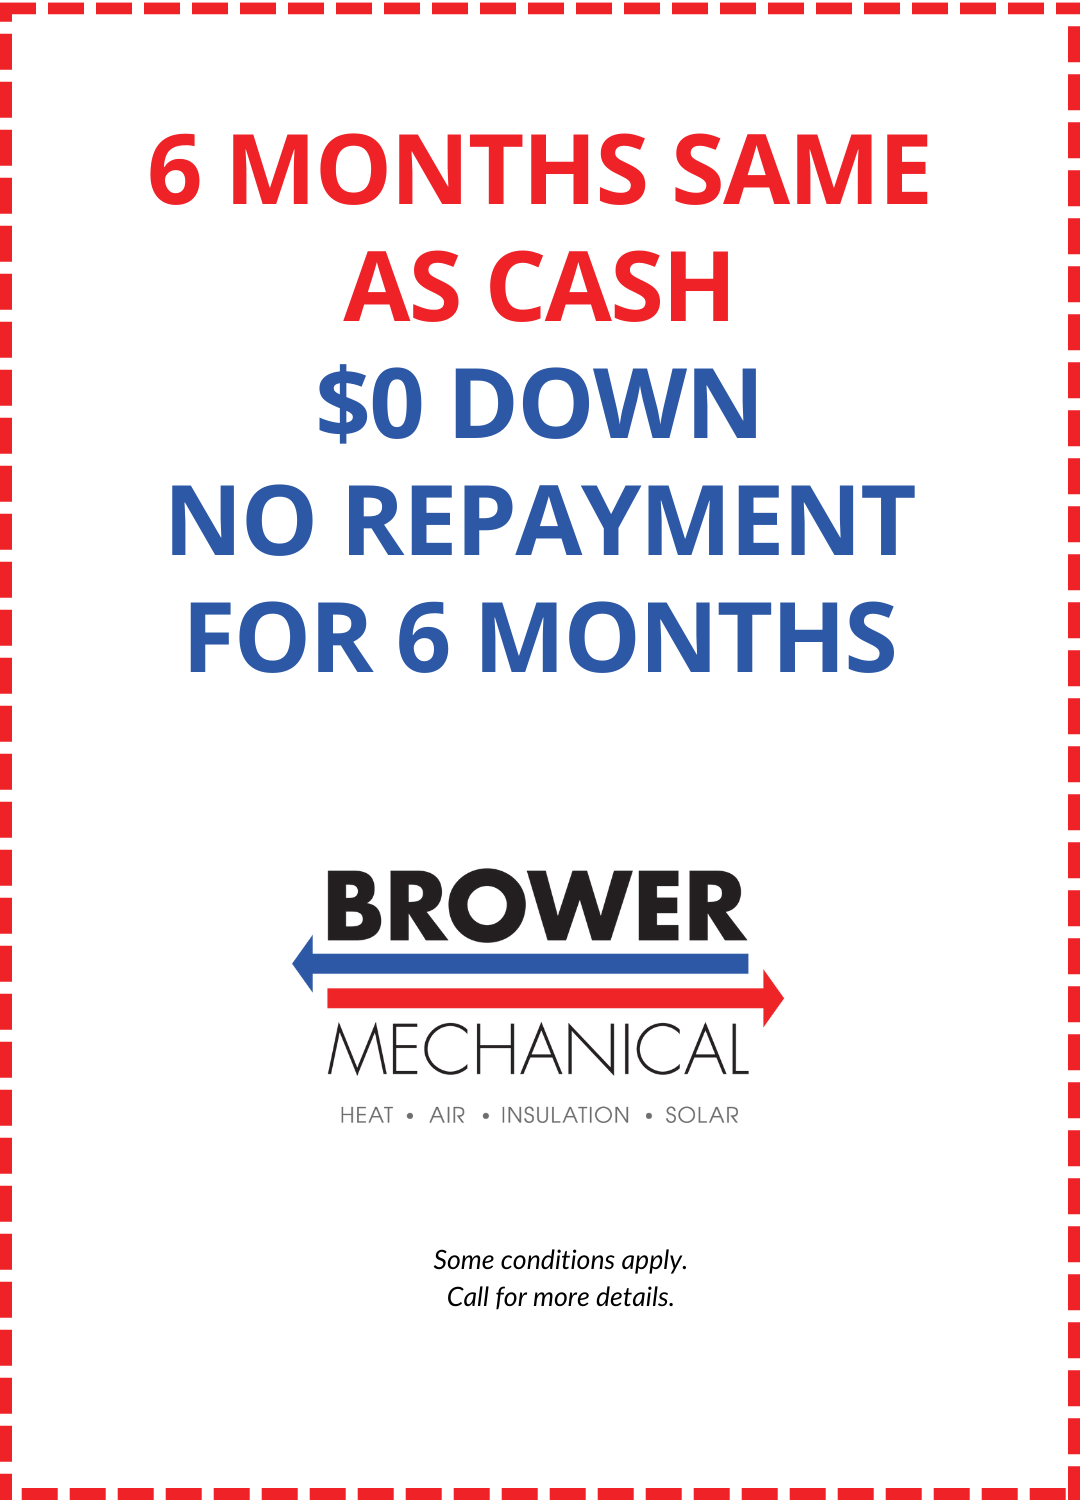 Brower Financing Special 6 Months Same As Cash Offer Coupon Graphic